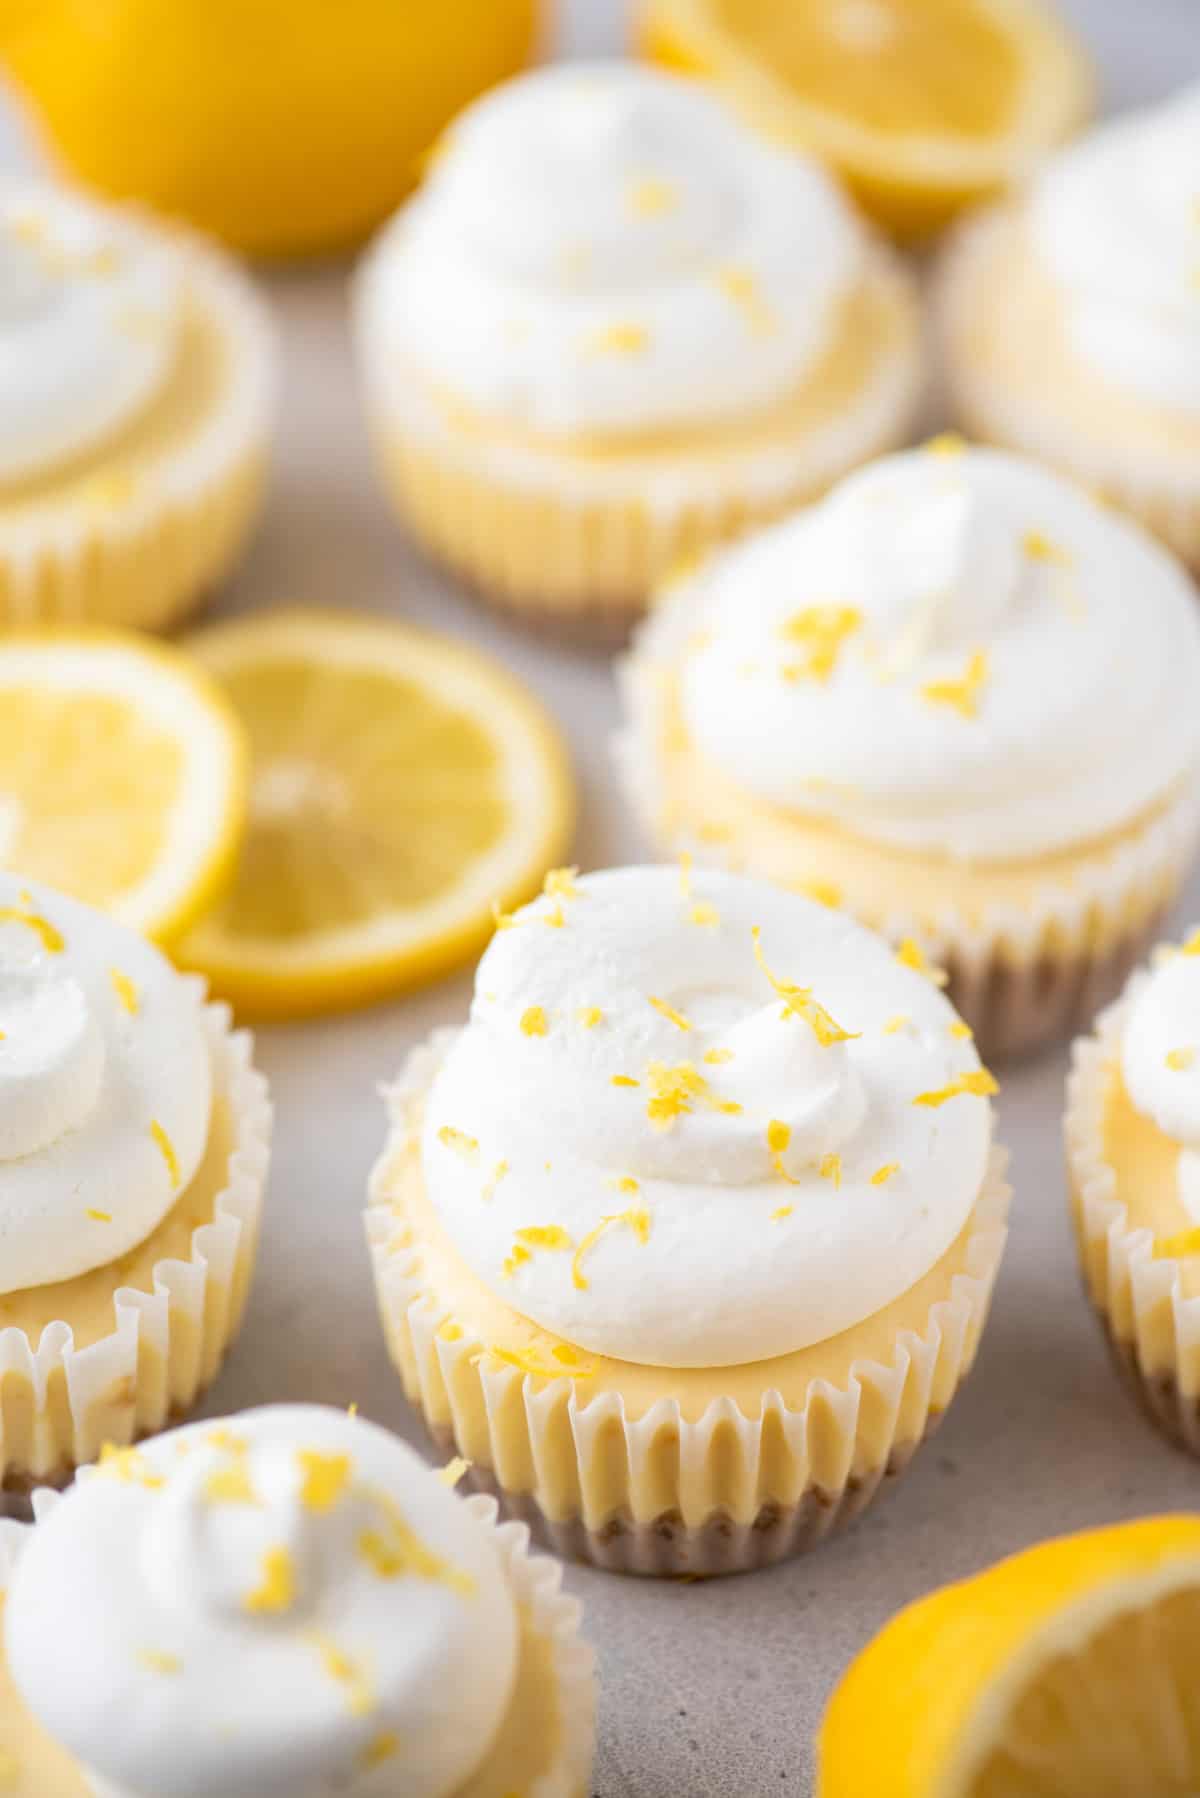 Mini lemon cheesecakes topped with whipped cream and lemon zest arranged on white surface